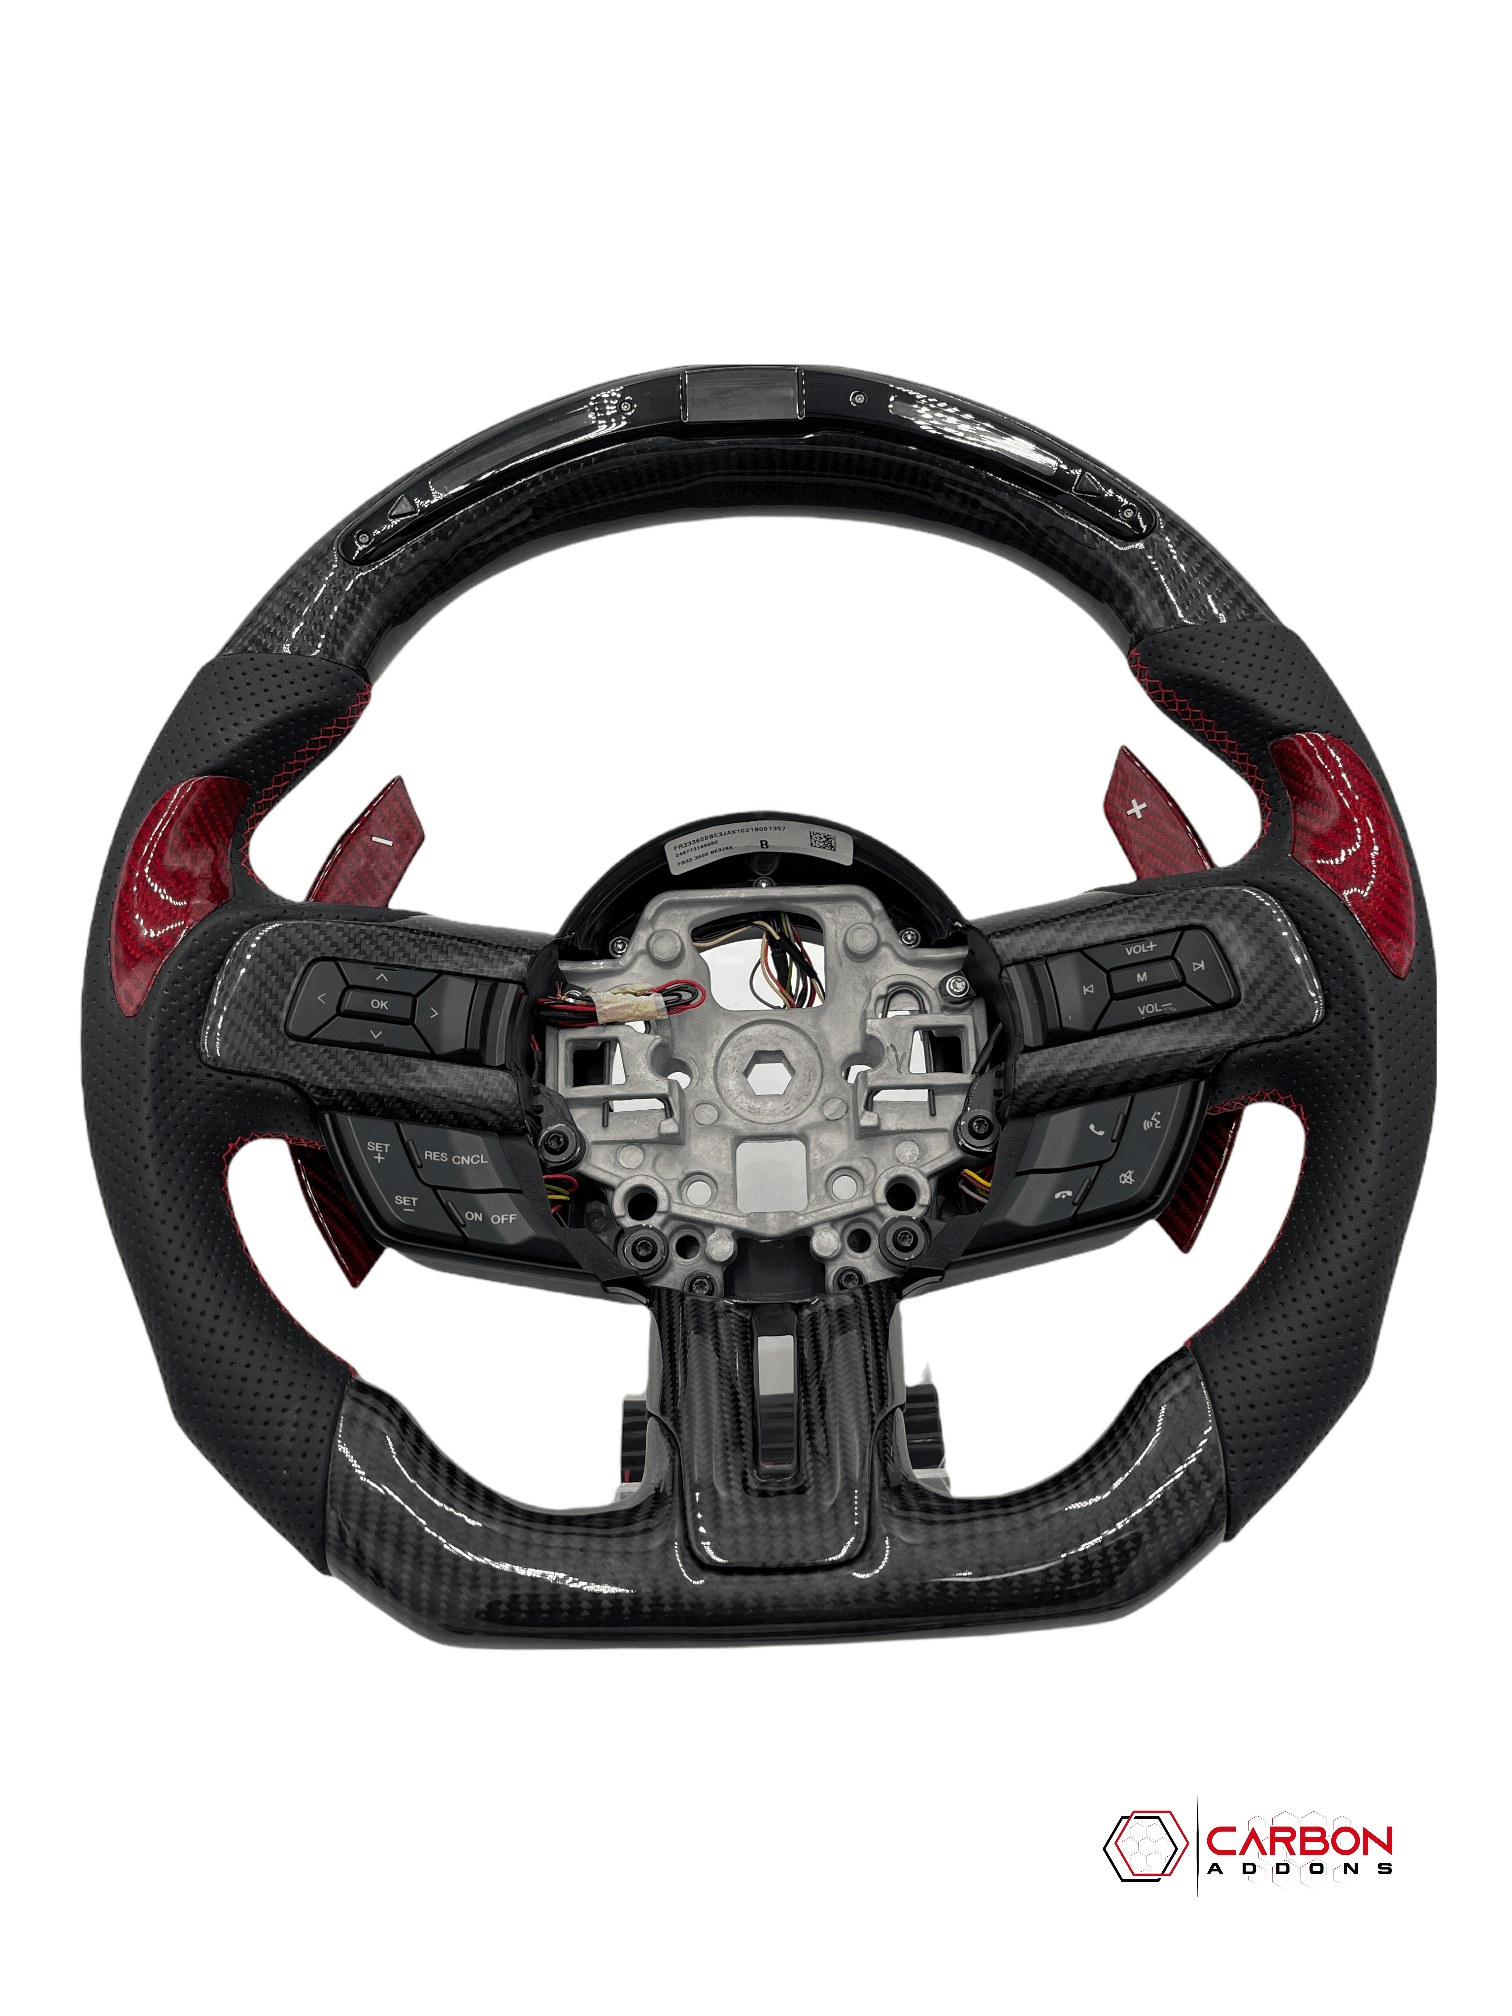 [Complete/Heated] Customizable Carbon Fiber Steering Wheel for 2015-2023 Ford Mustang - carbonaddons Carbon Fiber Parts, Accessories, Upgrades, Mods